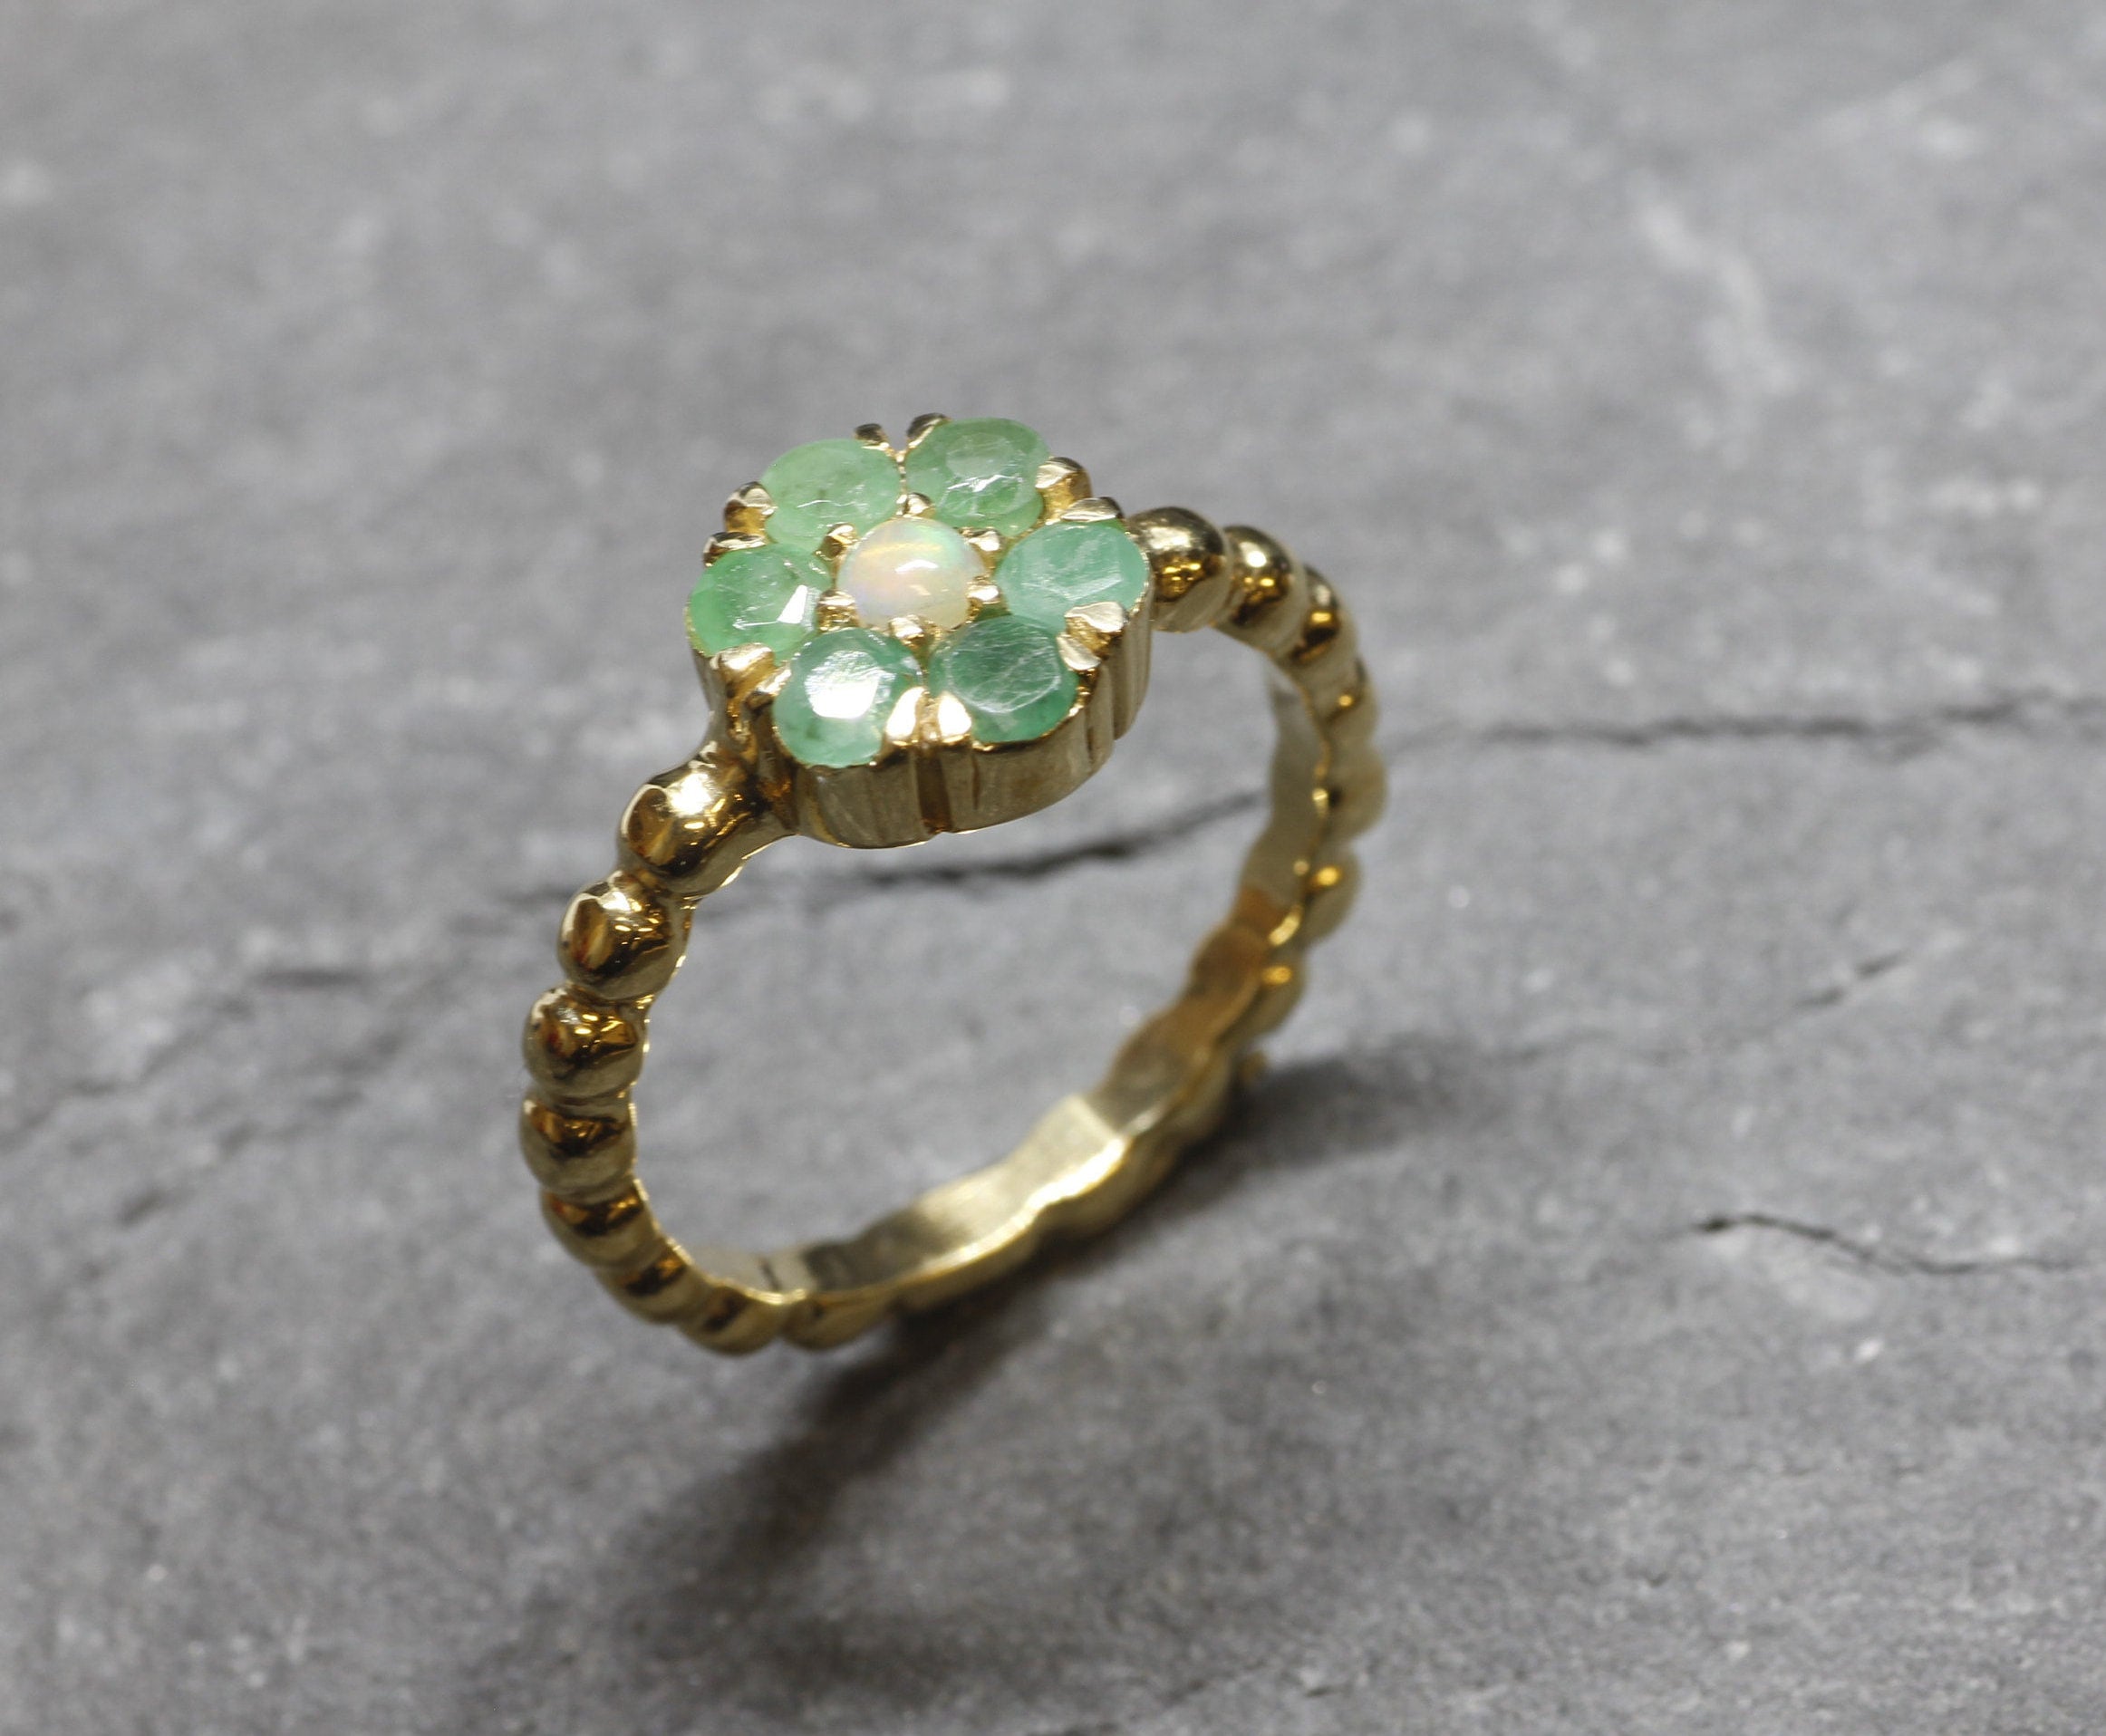 Gold Flower Ring, Natural Emerald Ring, Opal Ring, Green Daisy Ring, Gold Plated Ring, May Birthstone, Vintage Ring, Dainty Flower Ring